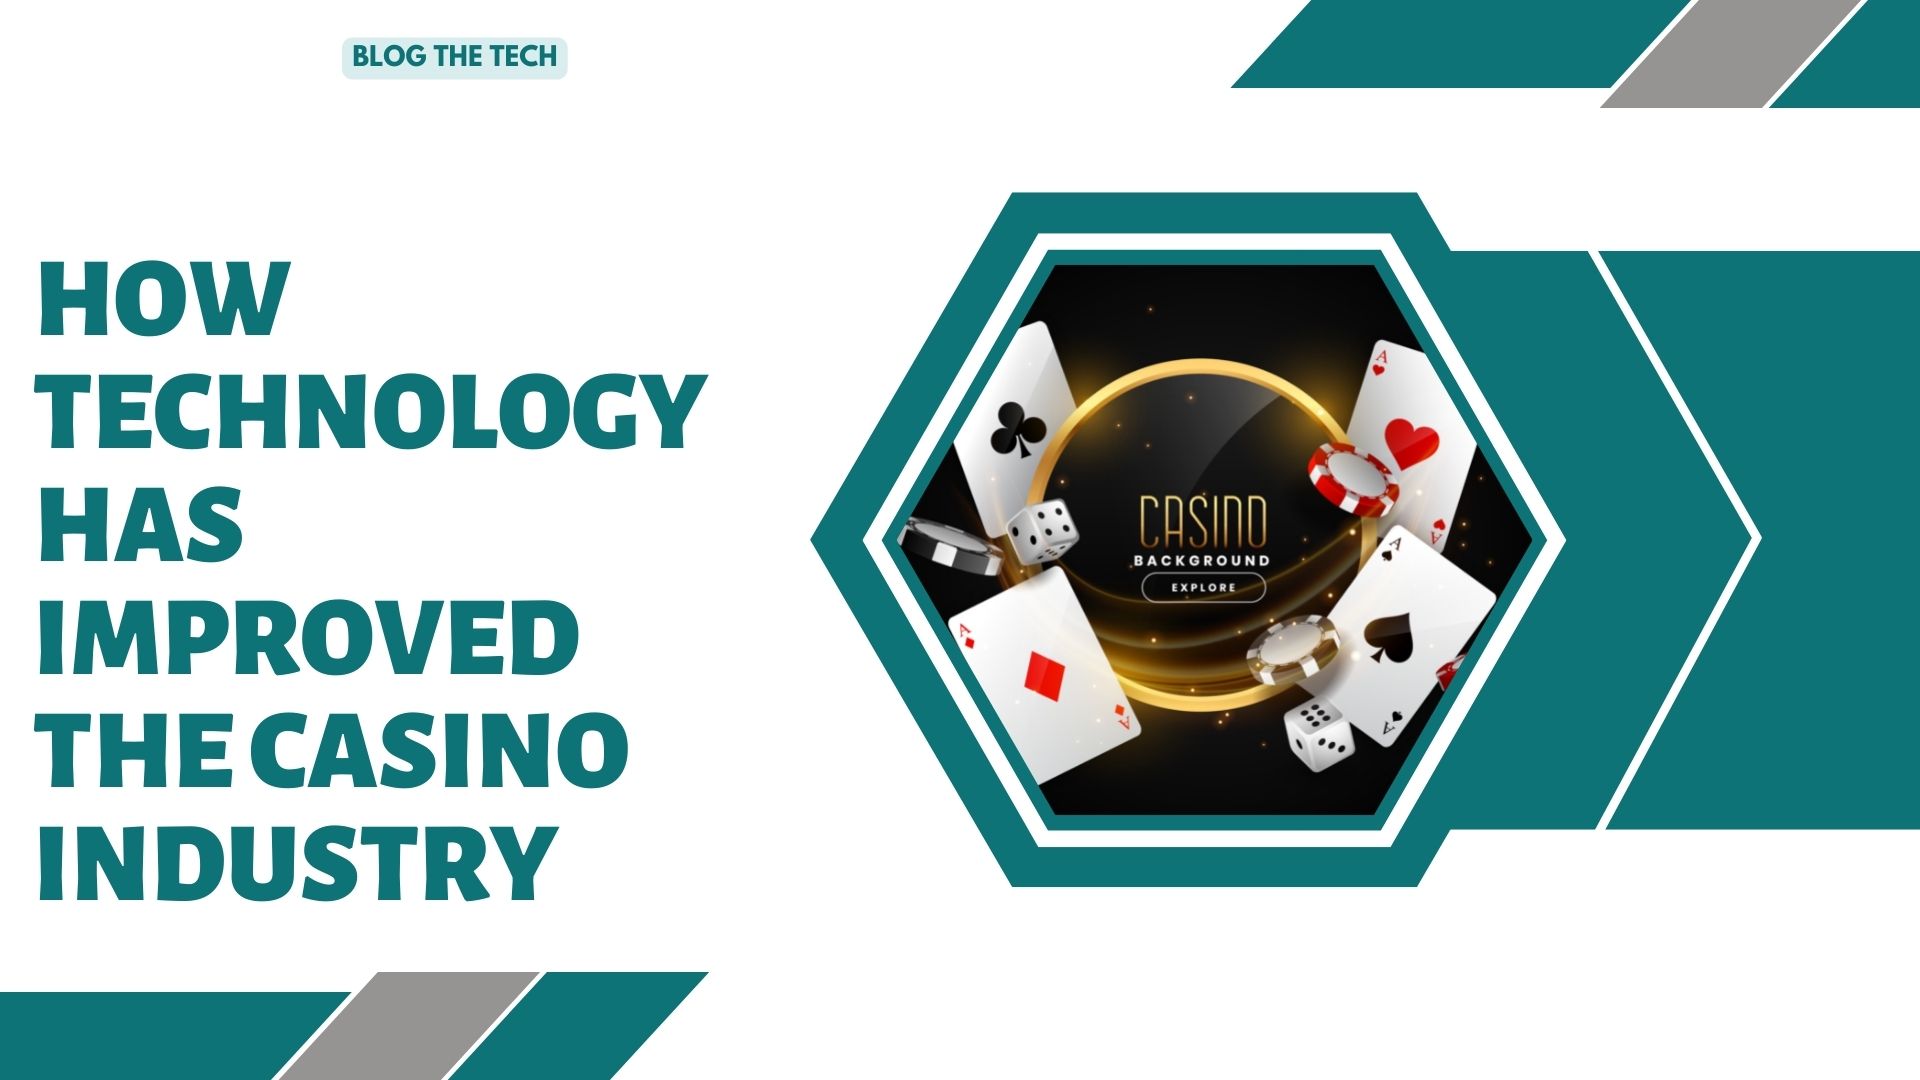 How Technology Has Improved the Casino Industry